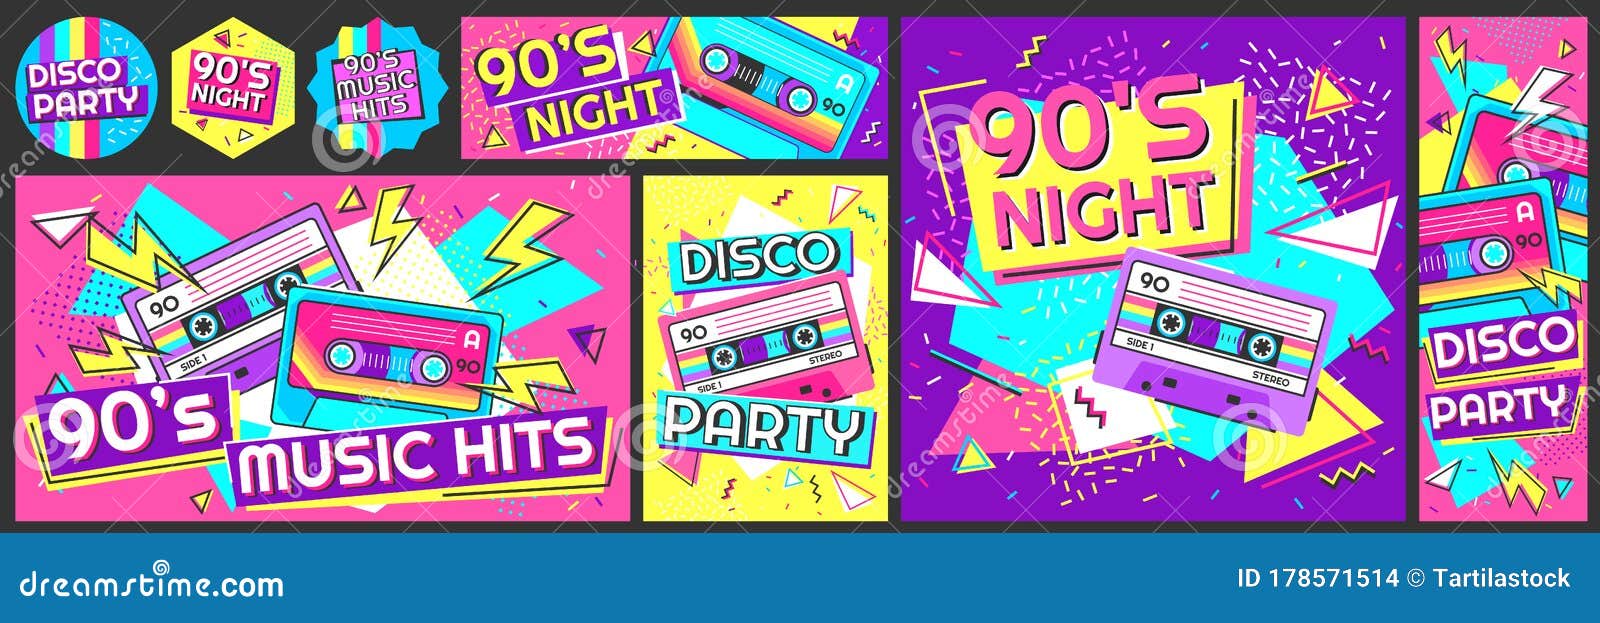 funky 90s disco party poster. nineties music hits banner, 90s dancing night invite and retro stereo tape 